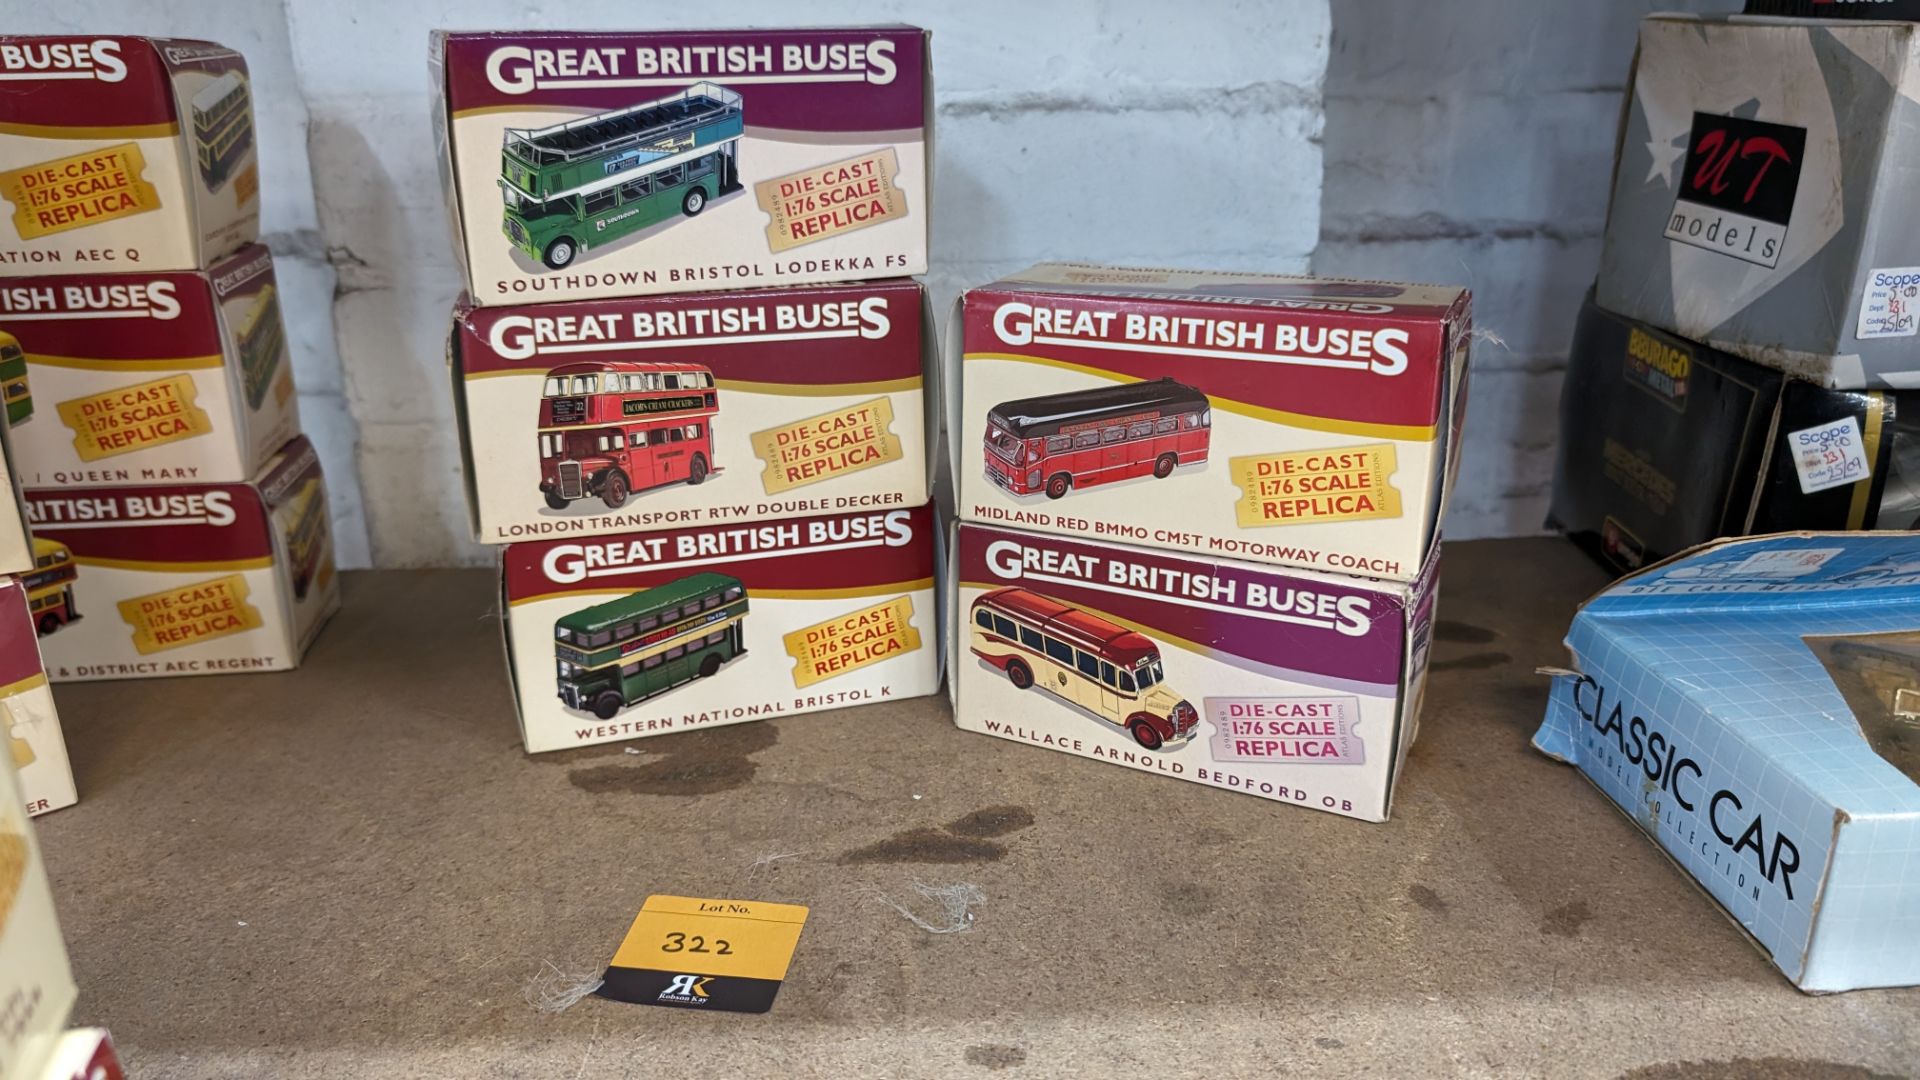 5 assorted Great British Buses die-cast replica buses, 1:76 scale